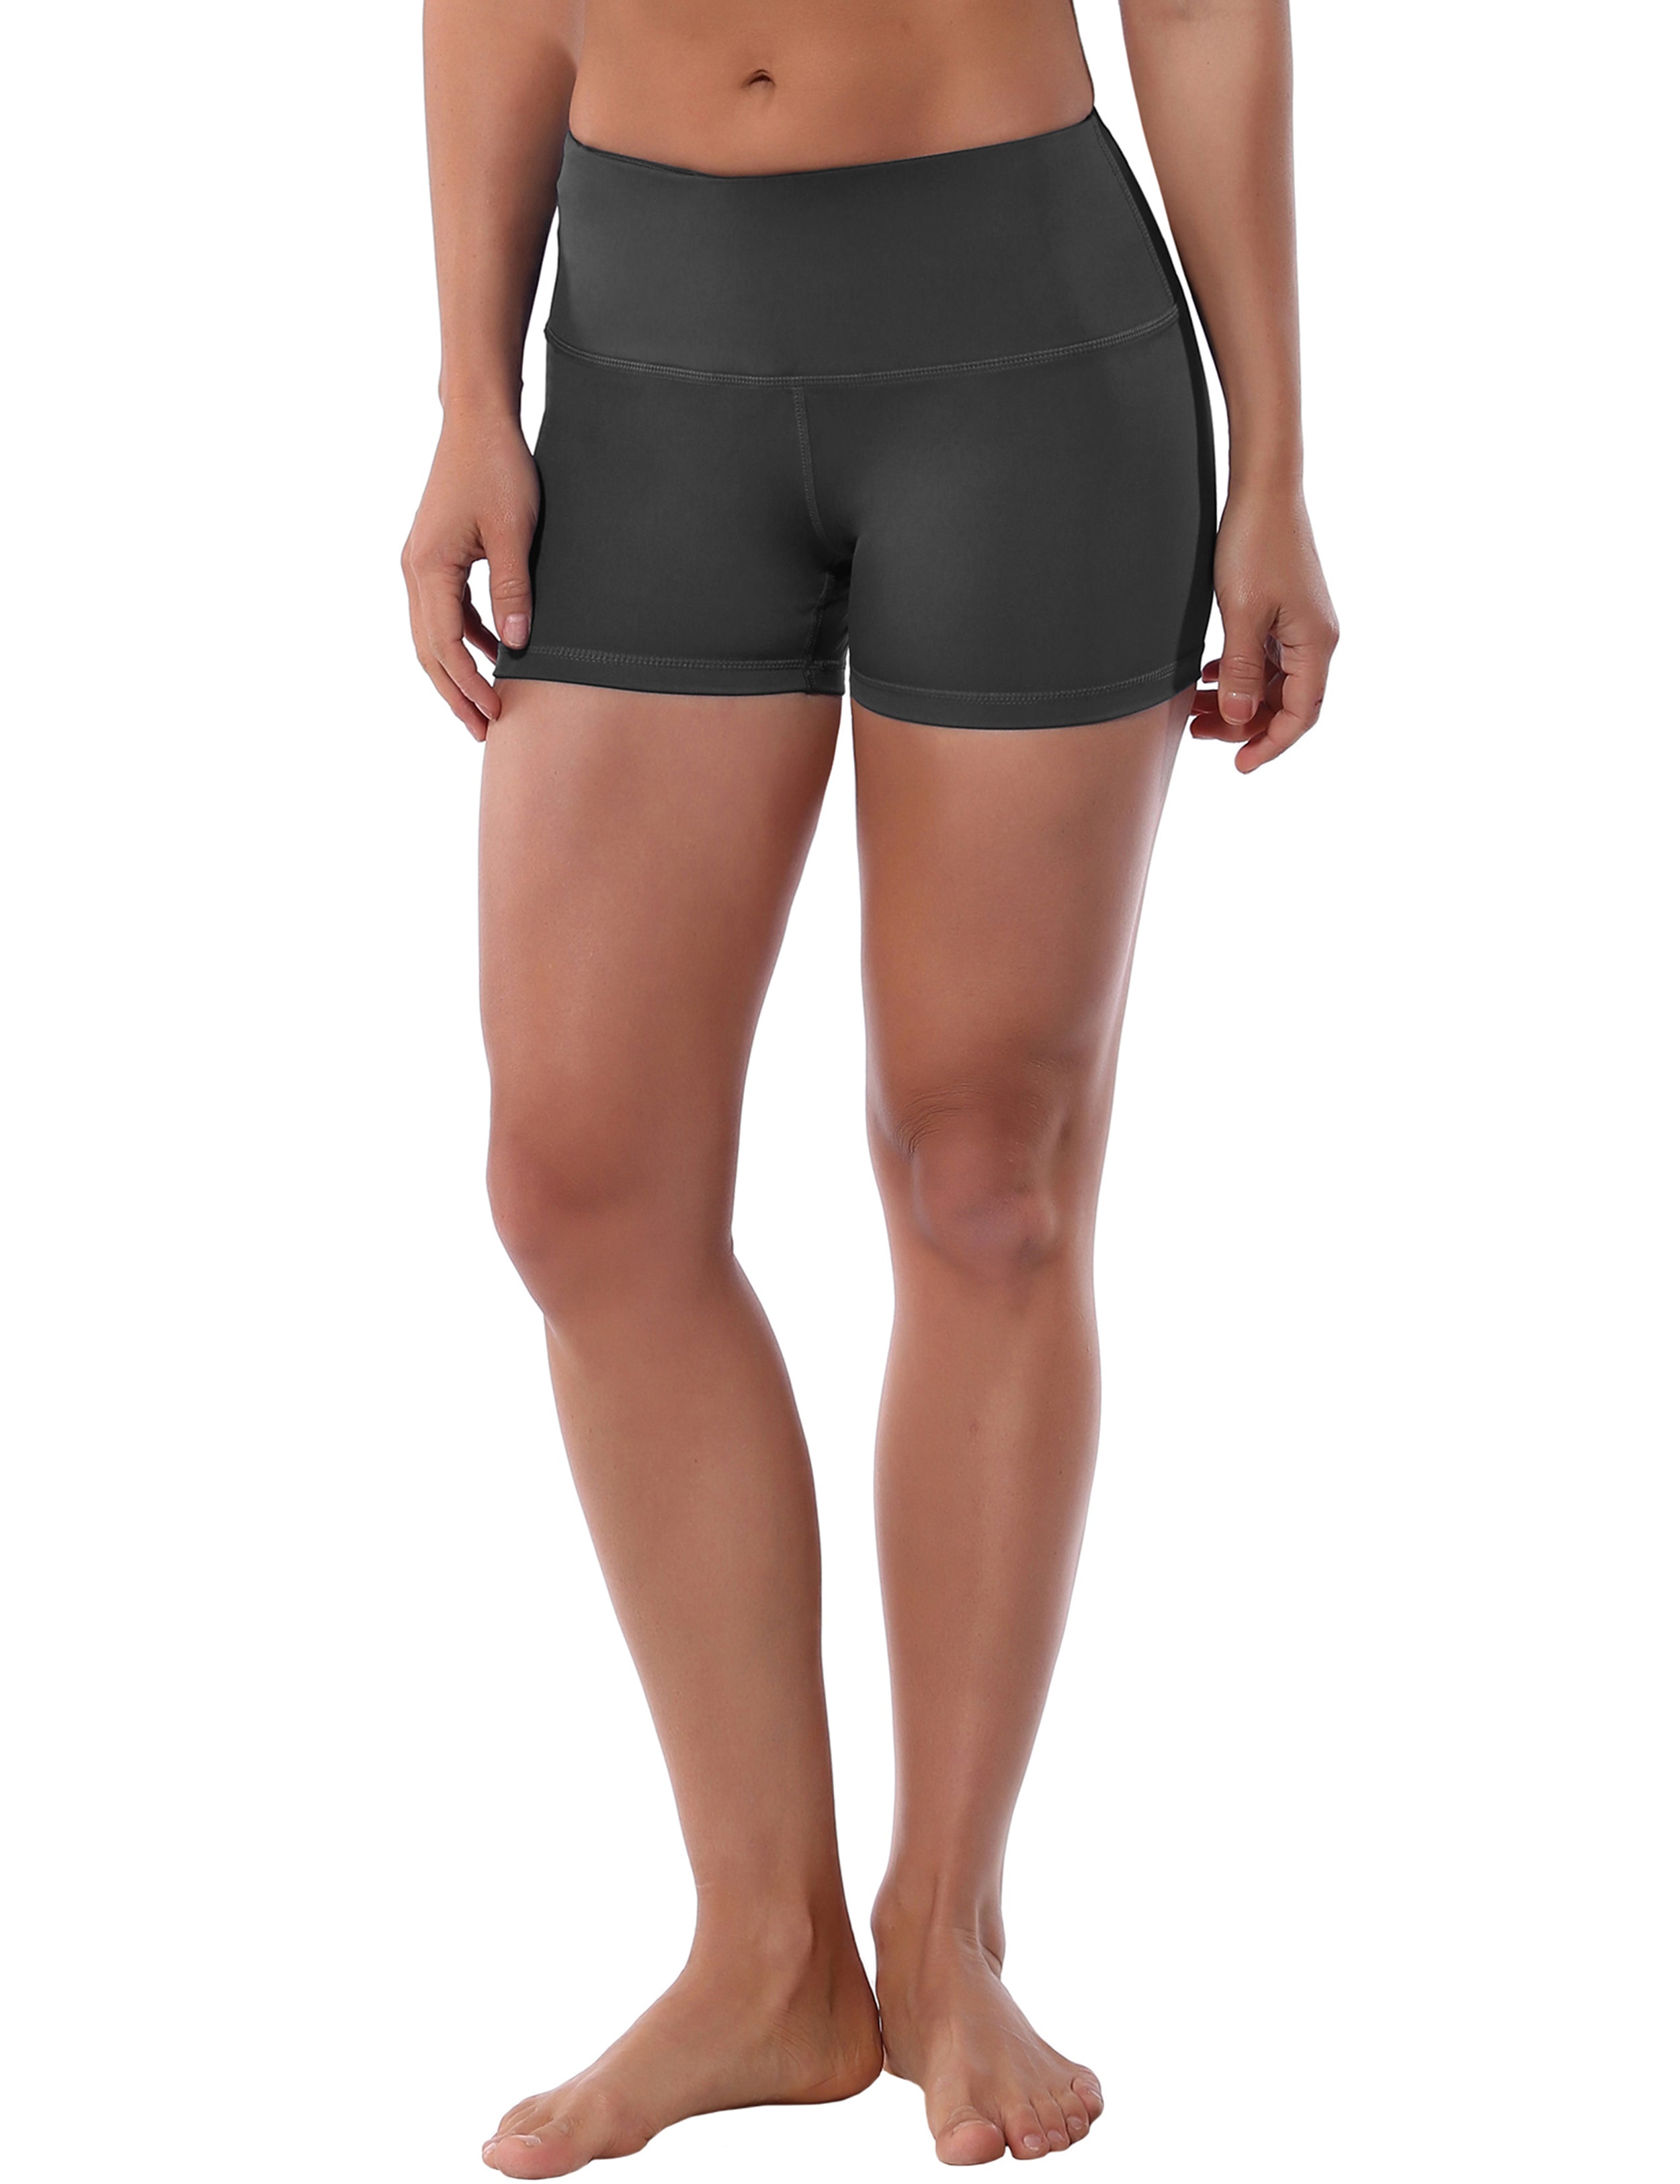 2.5" Yoga Shorts shadowcharcoal Softest-ever fabric High elasticity High density 4-way stretch Fabric doesn't attract lint easily No see-through Moisture-wicking Machine wash 75% Nylon, 25% Spandex